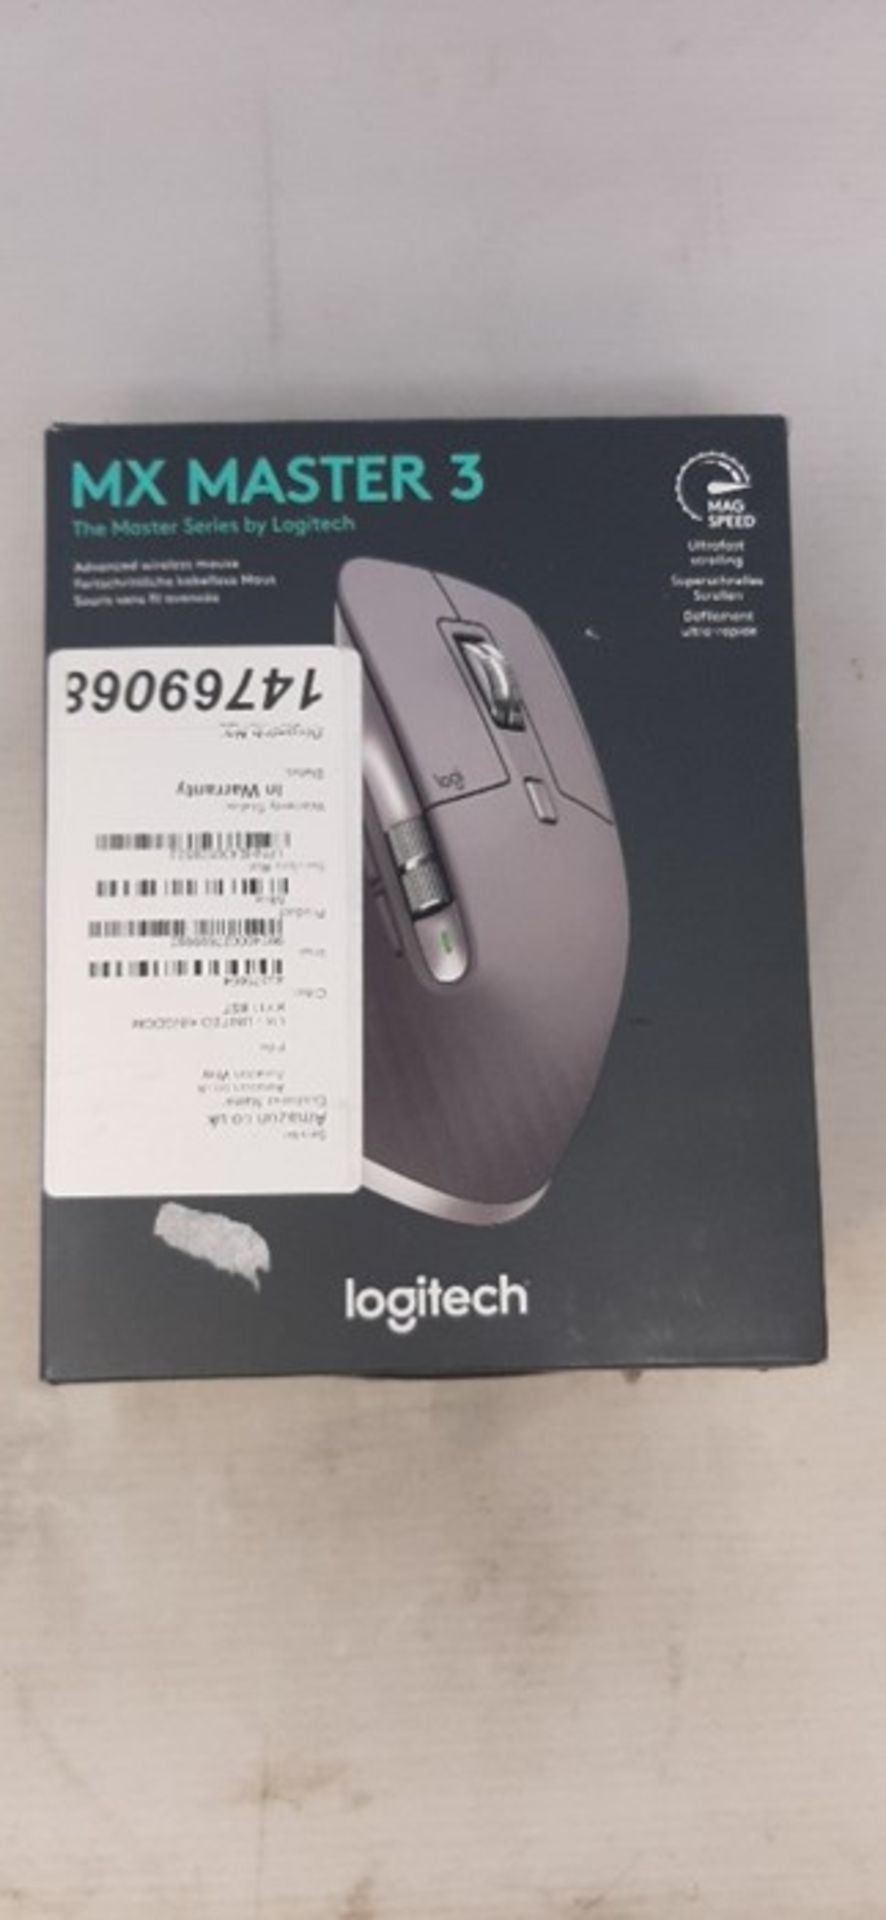 RRP £85.00 Logitech MX Master 3 Advanced Wireless Mouse, Bluetooth or 2.4GHz USB Receiver, Ultraf - Image 2 of 3